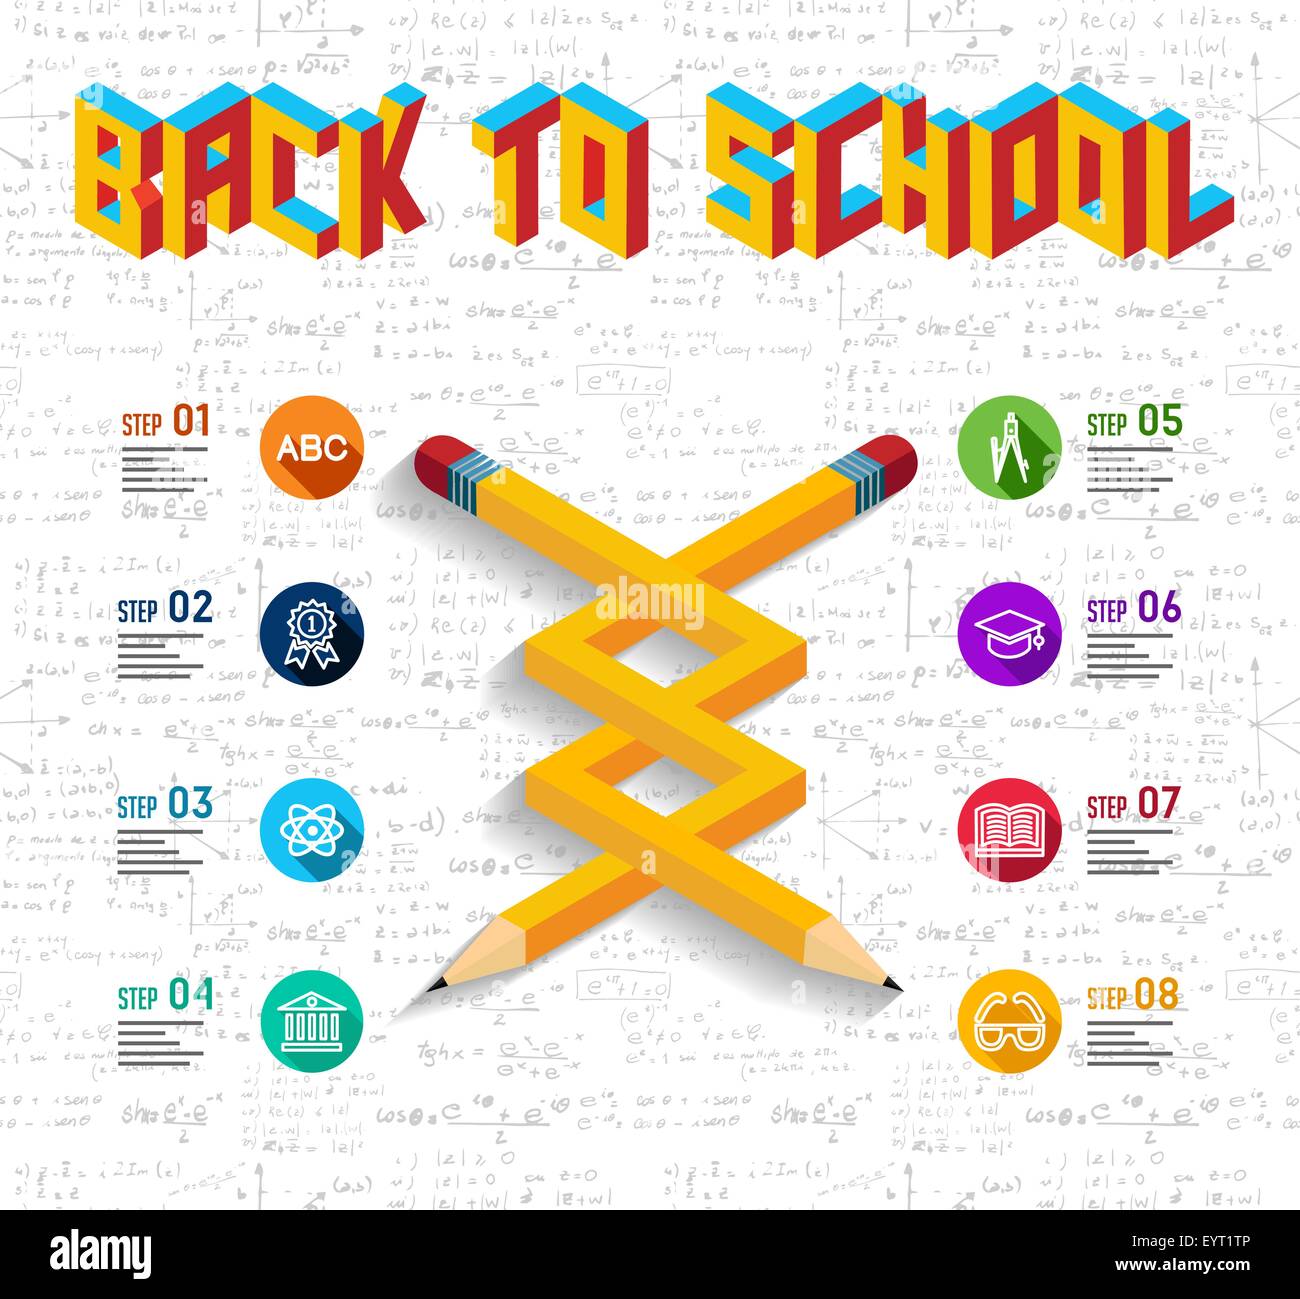 Back to school concept infographic with impossible pencil shape illustration and education elements seamless pattern background. Stock Vector